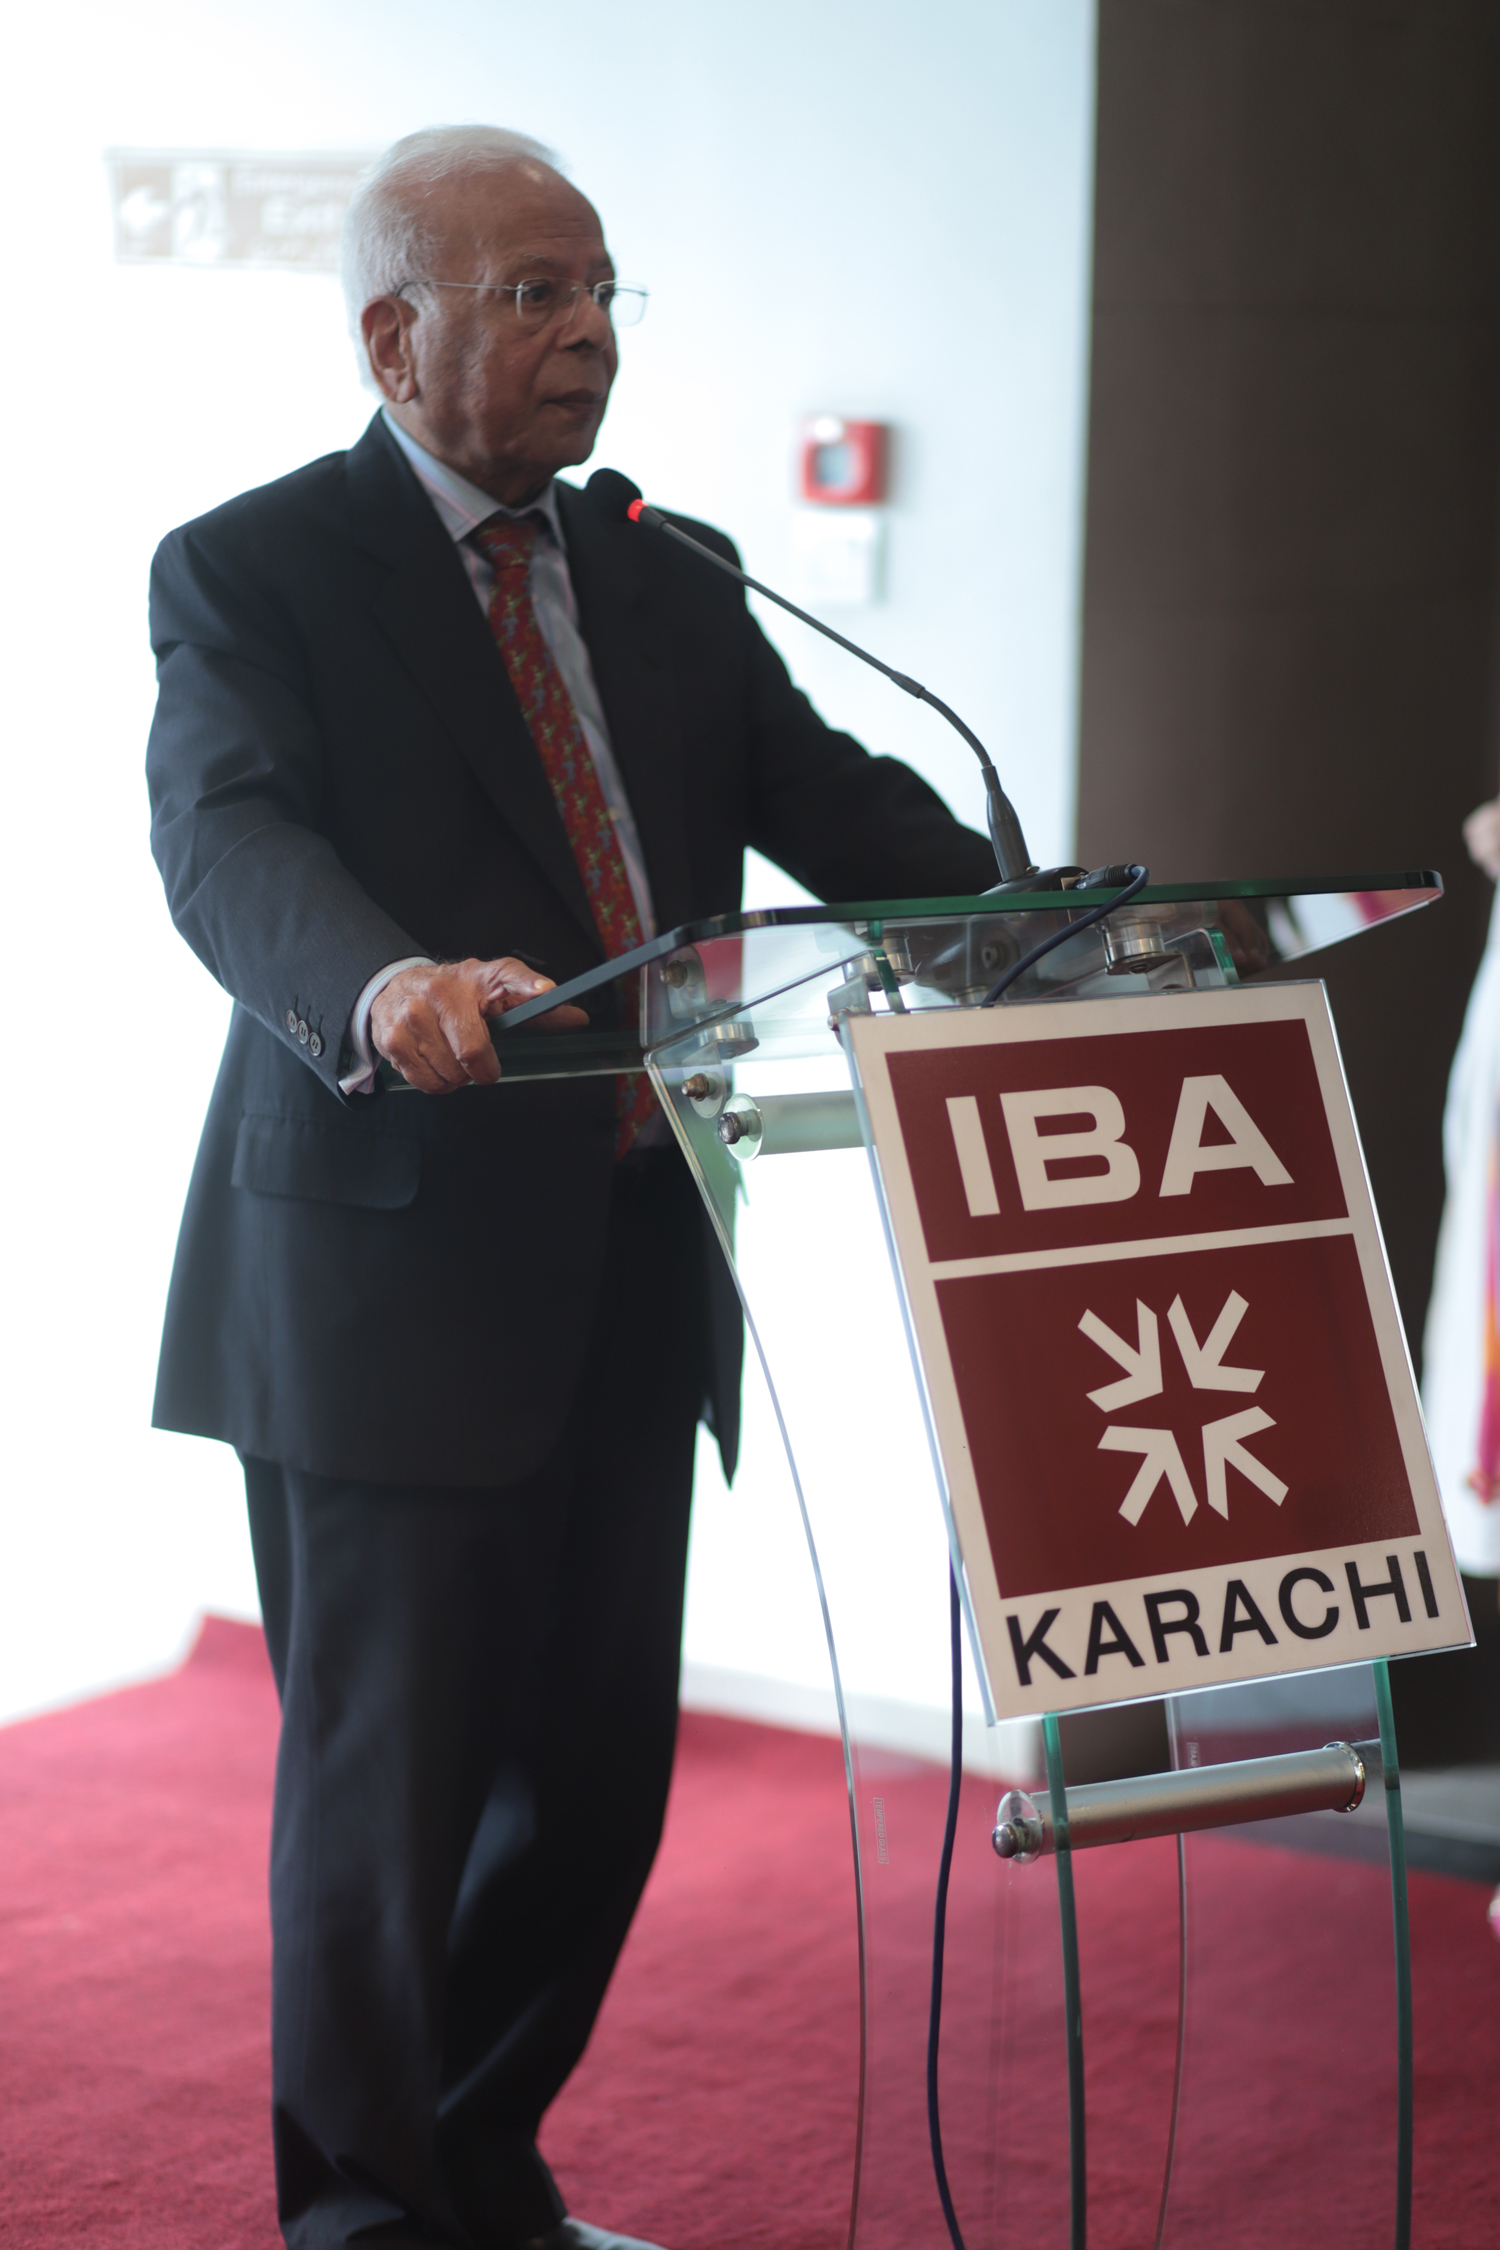 IBA-CEE hosts ‘The Mediator's Magic: Transforming Conflict into Collaboration’ 